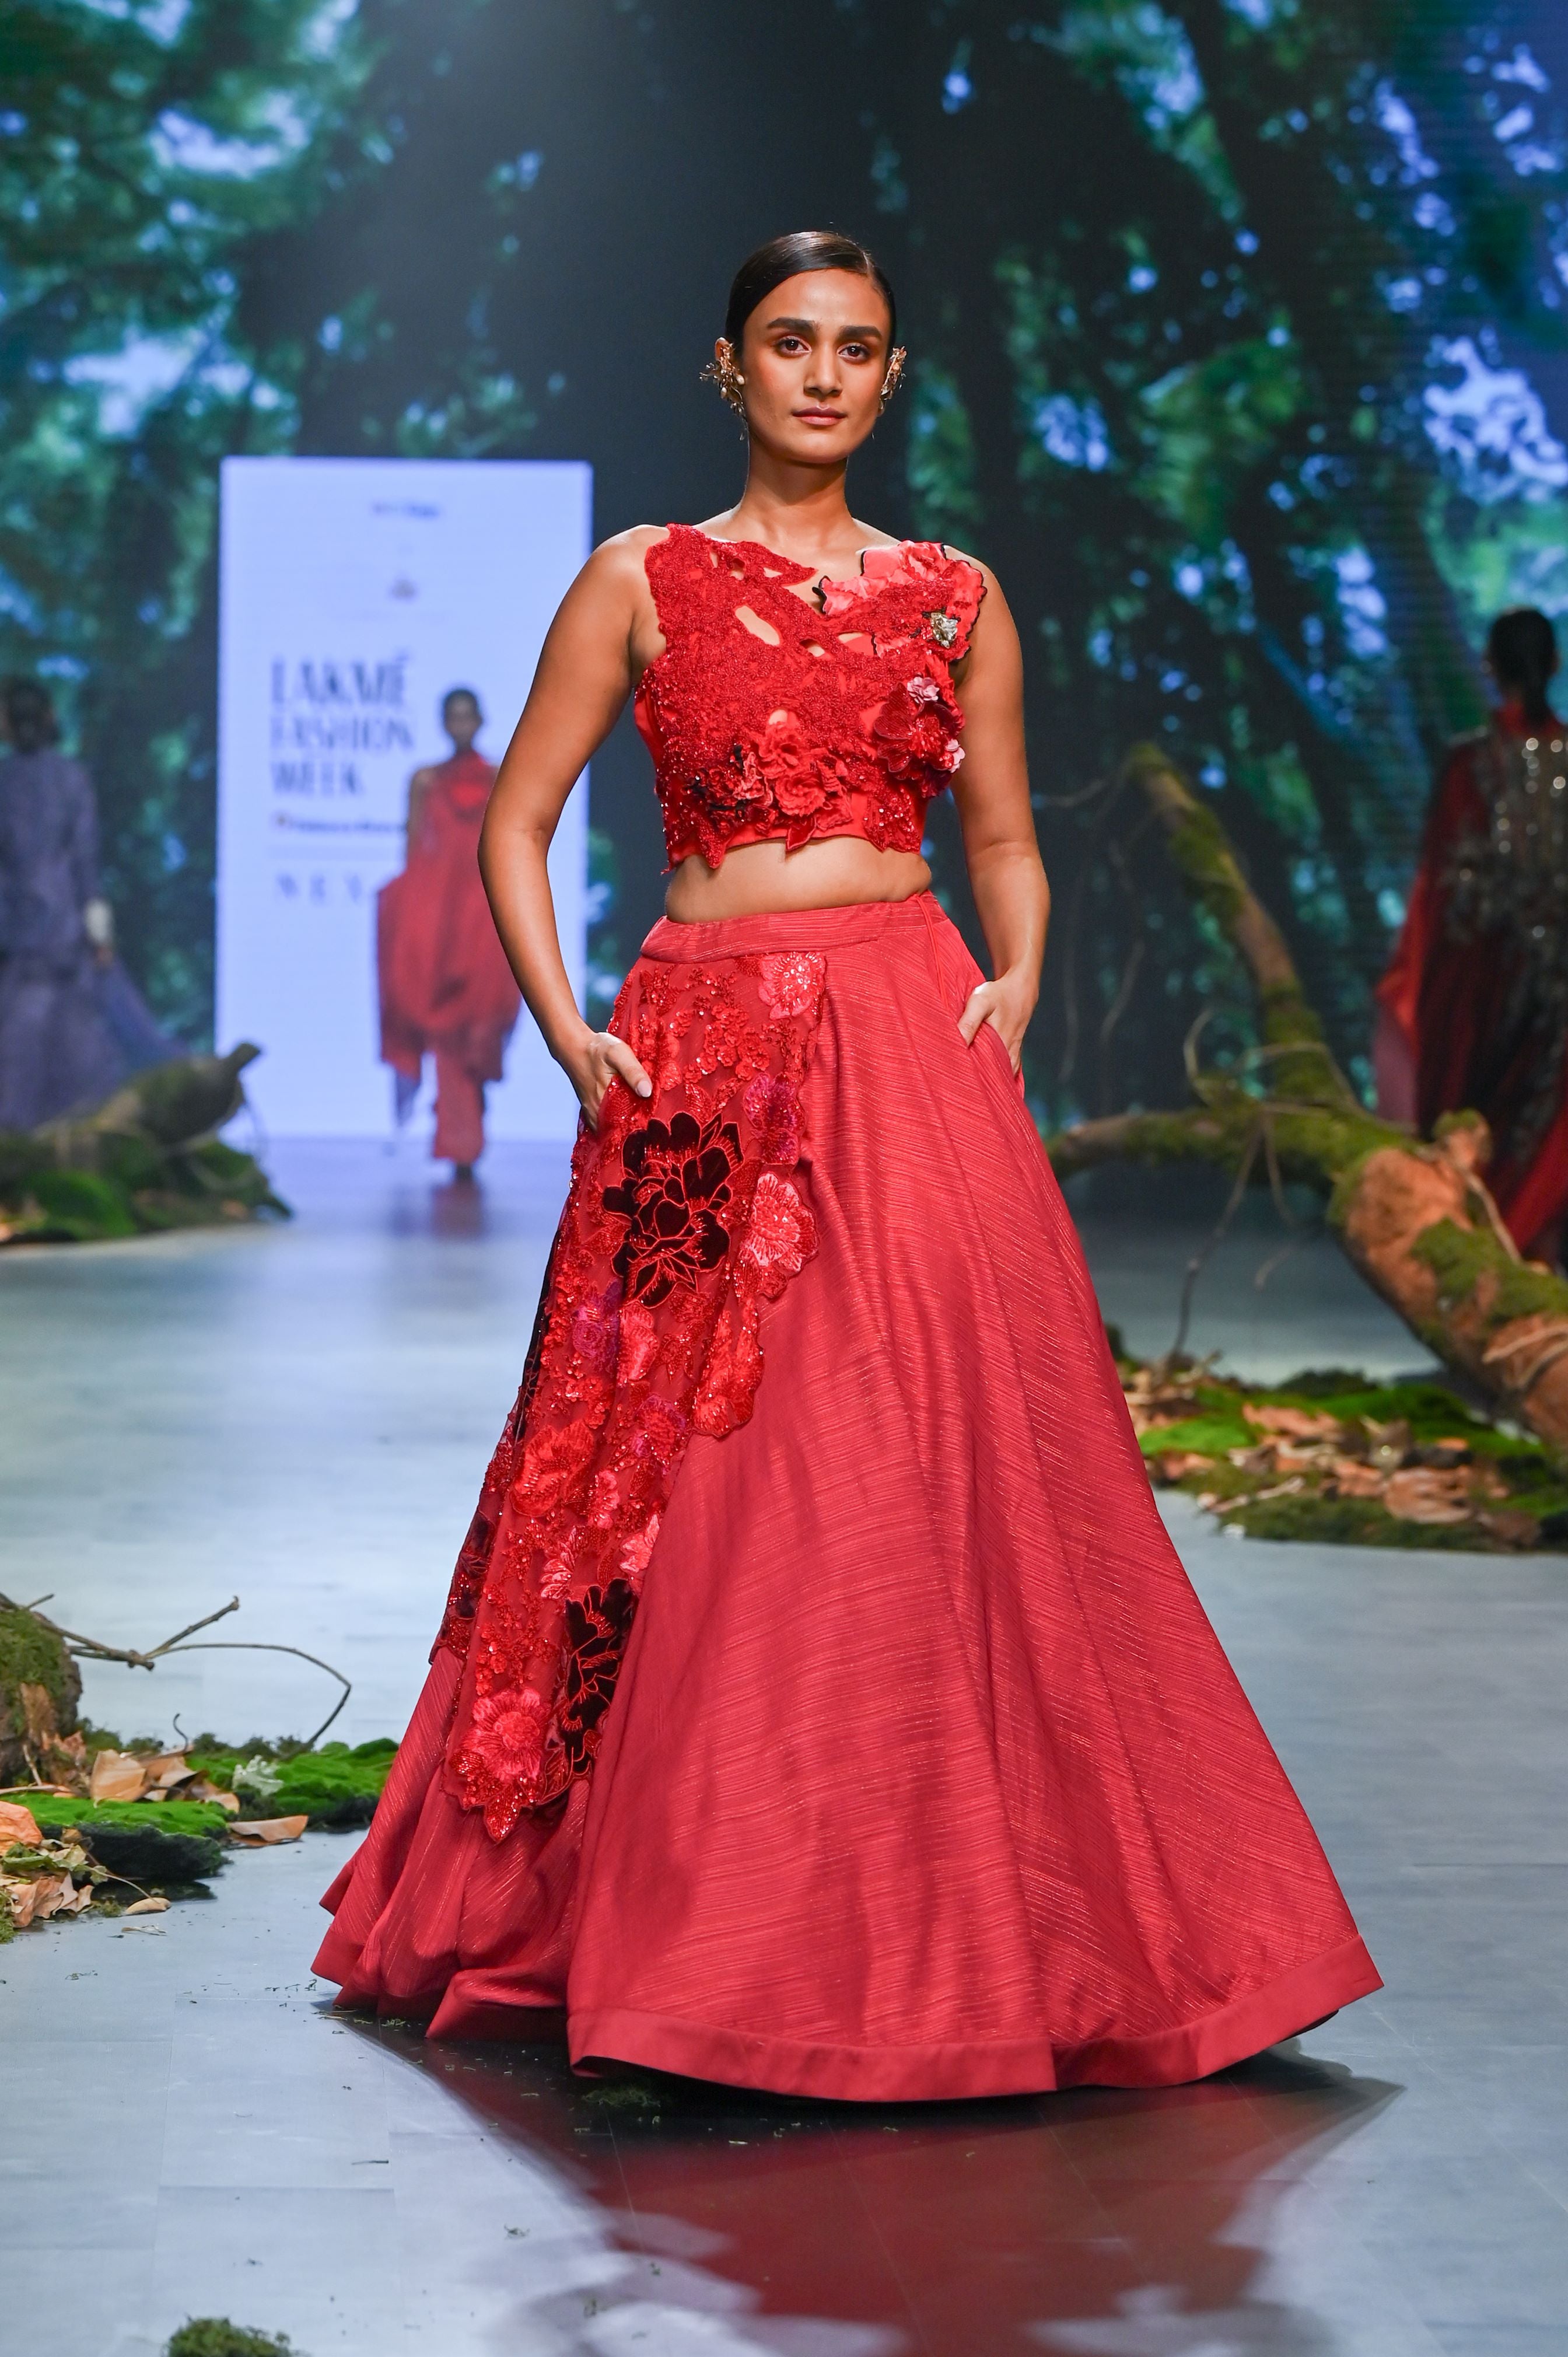 Bridal Lehengas In Red We Can't Get Over | Bridal lehenga red, Bridal  lehenga designs, Lehenga designs